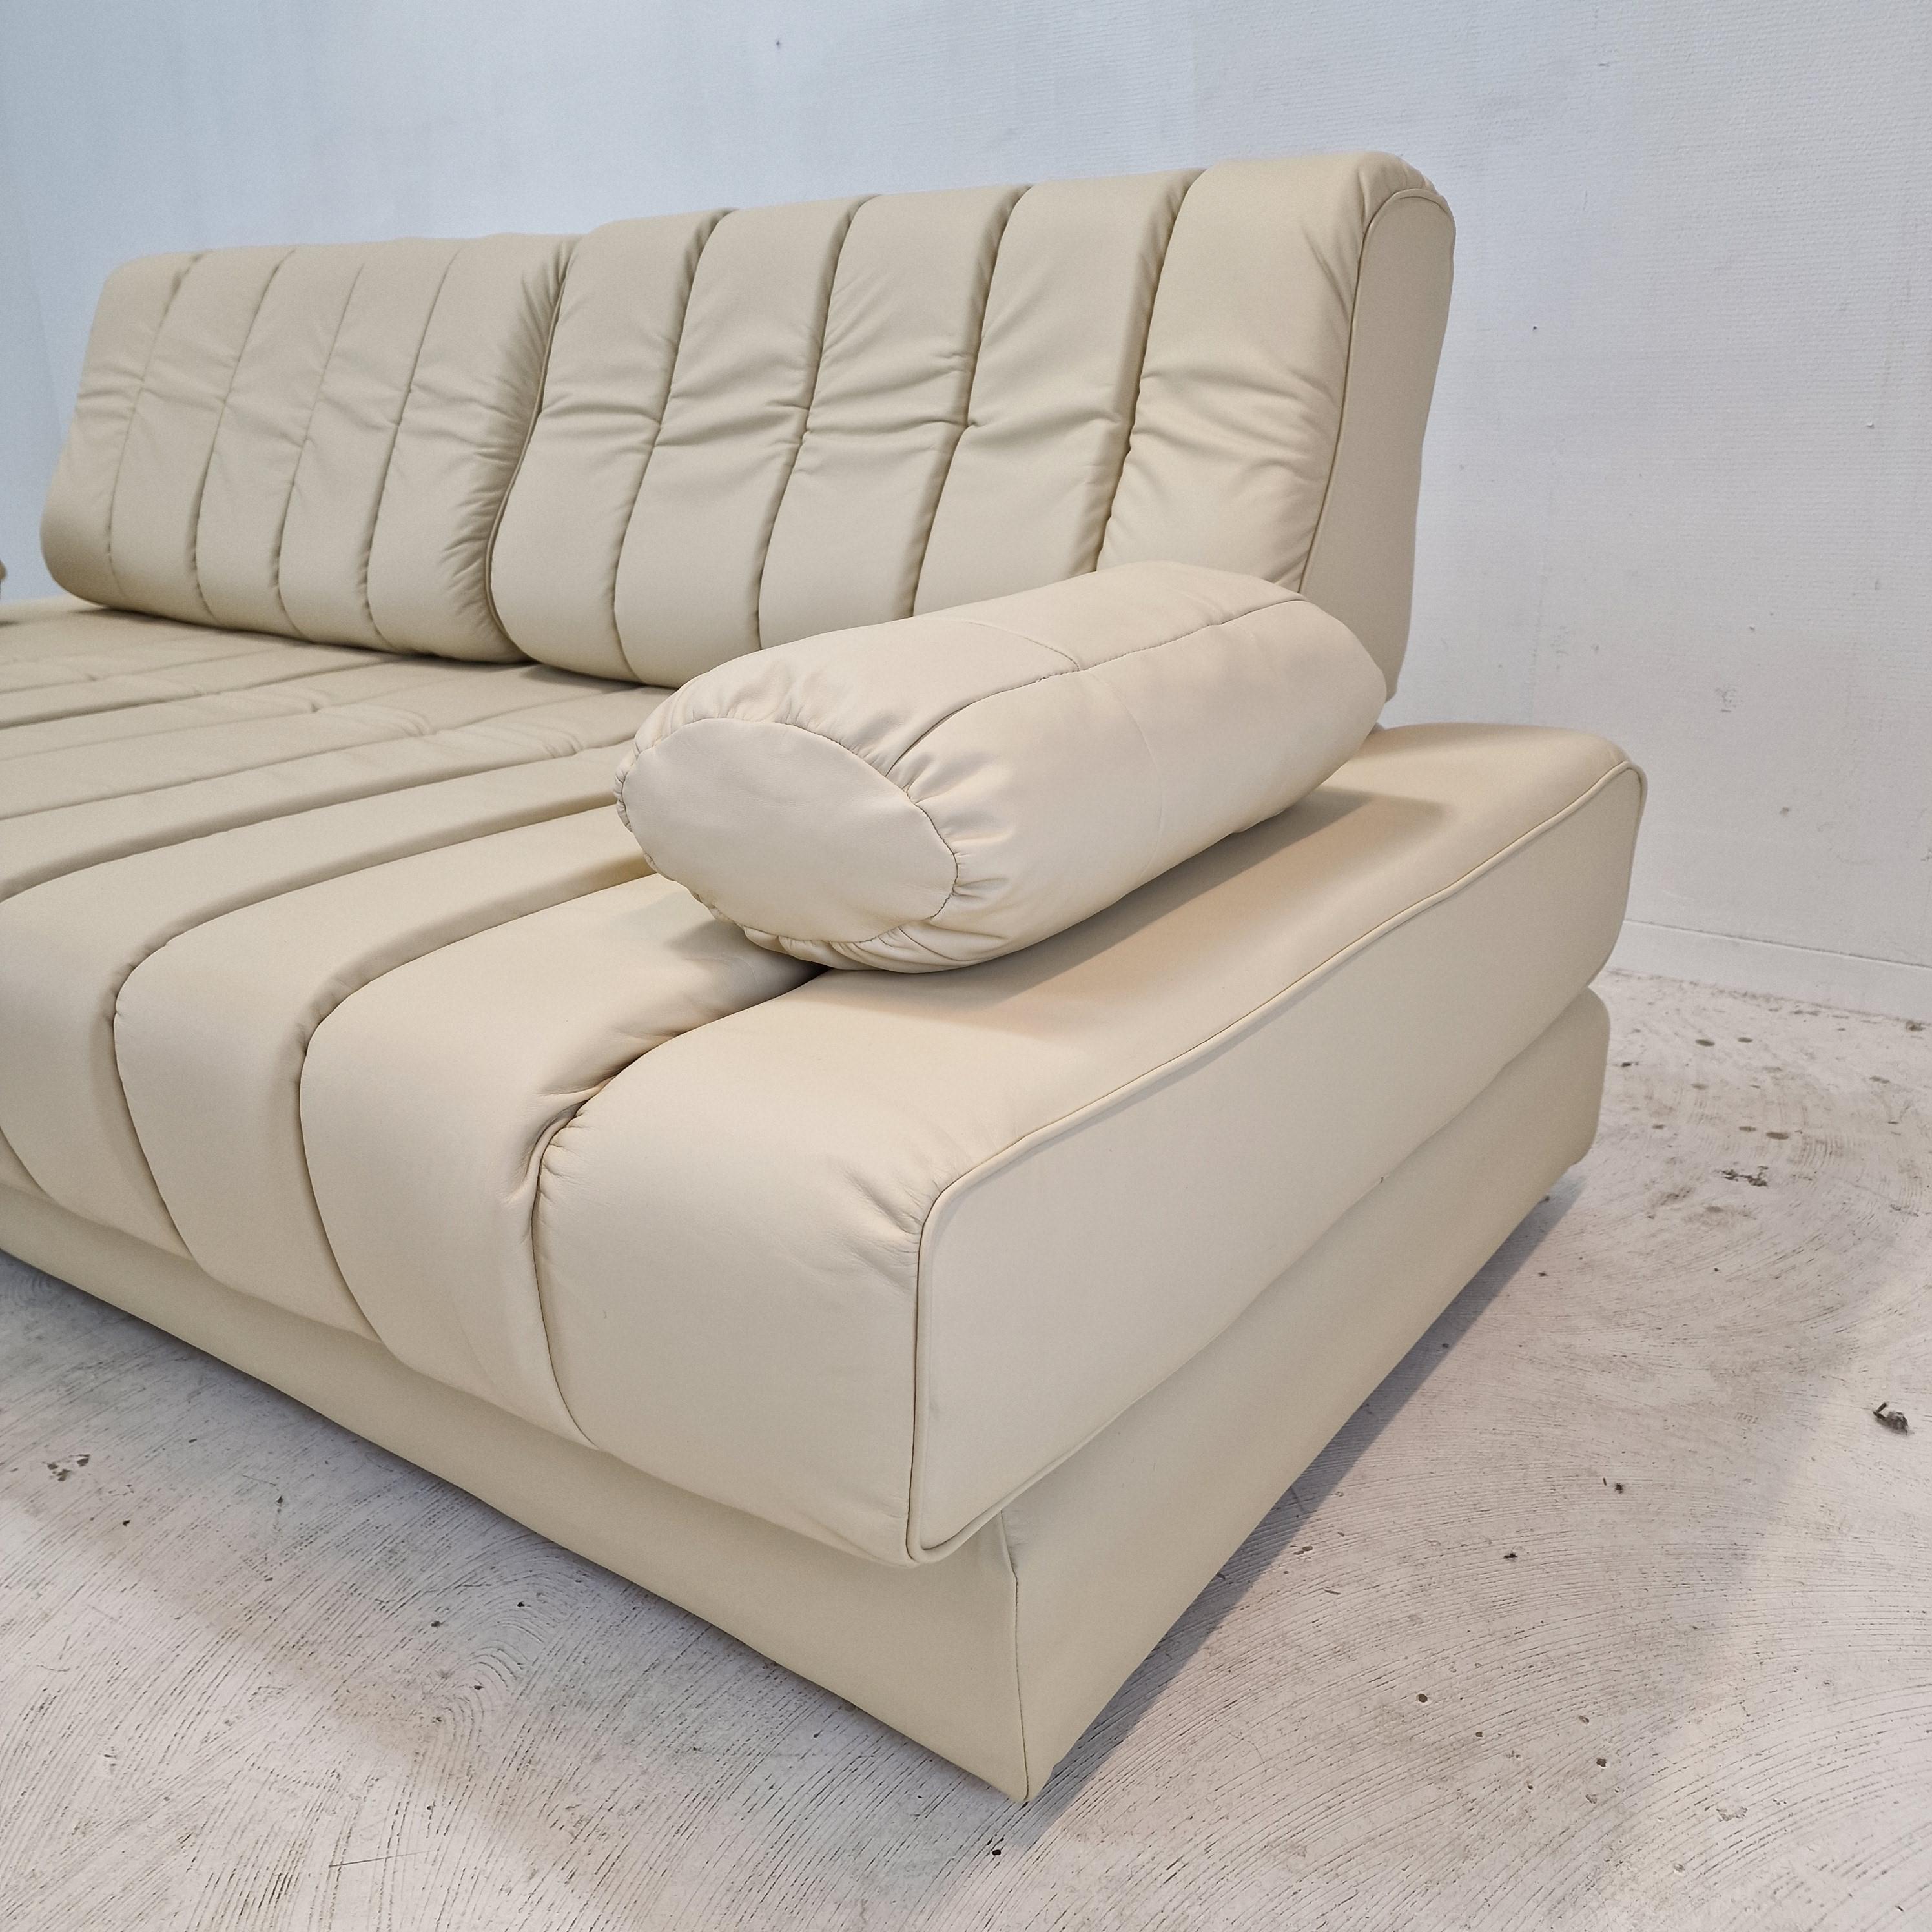 DS-85 Sofa or Daybed by De Sede, Switzerland 1970s For Sale 7